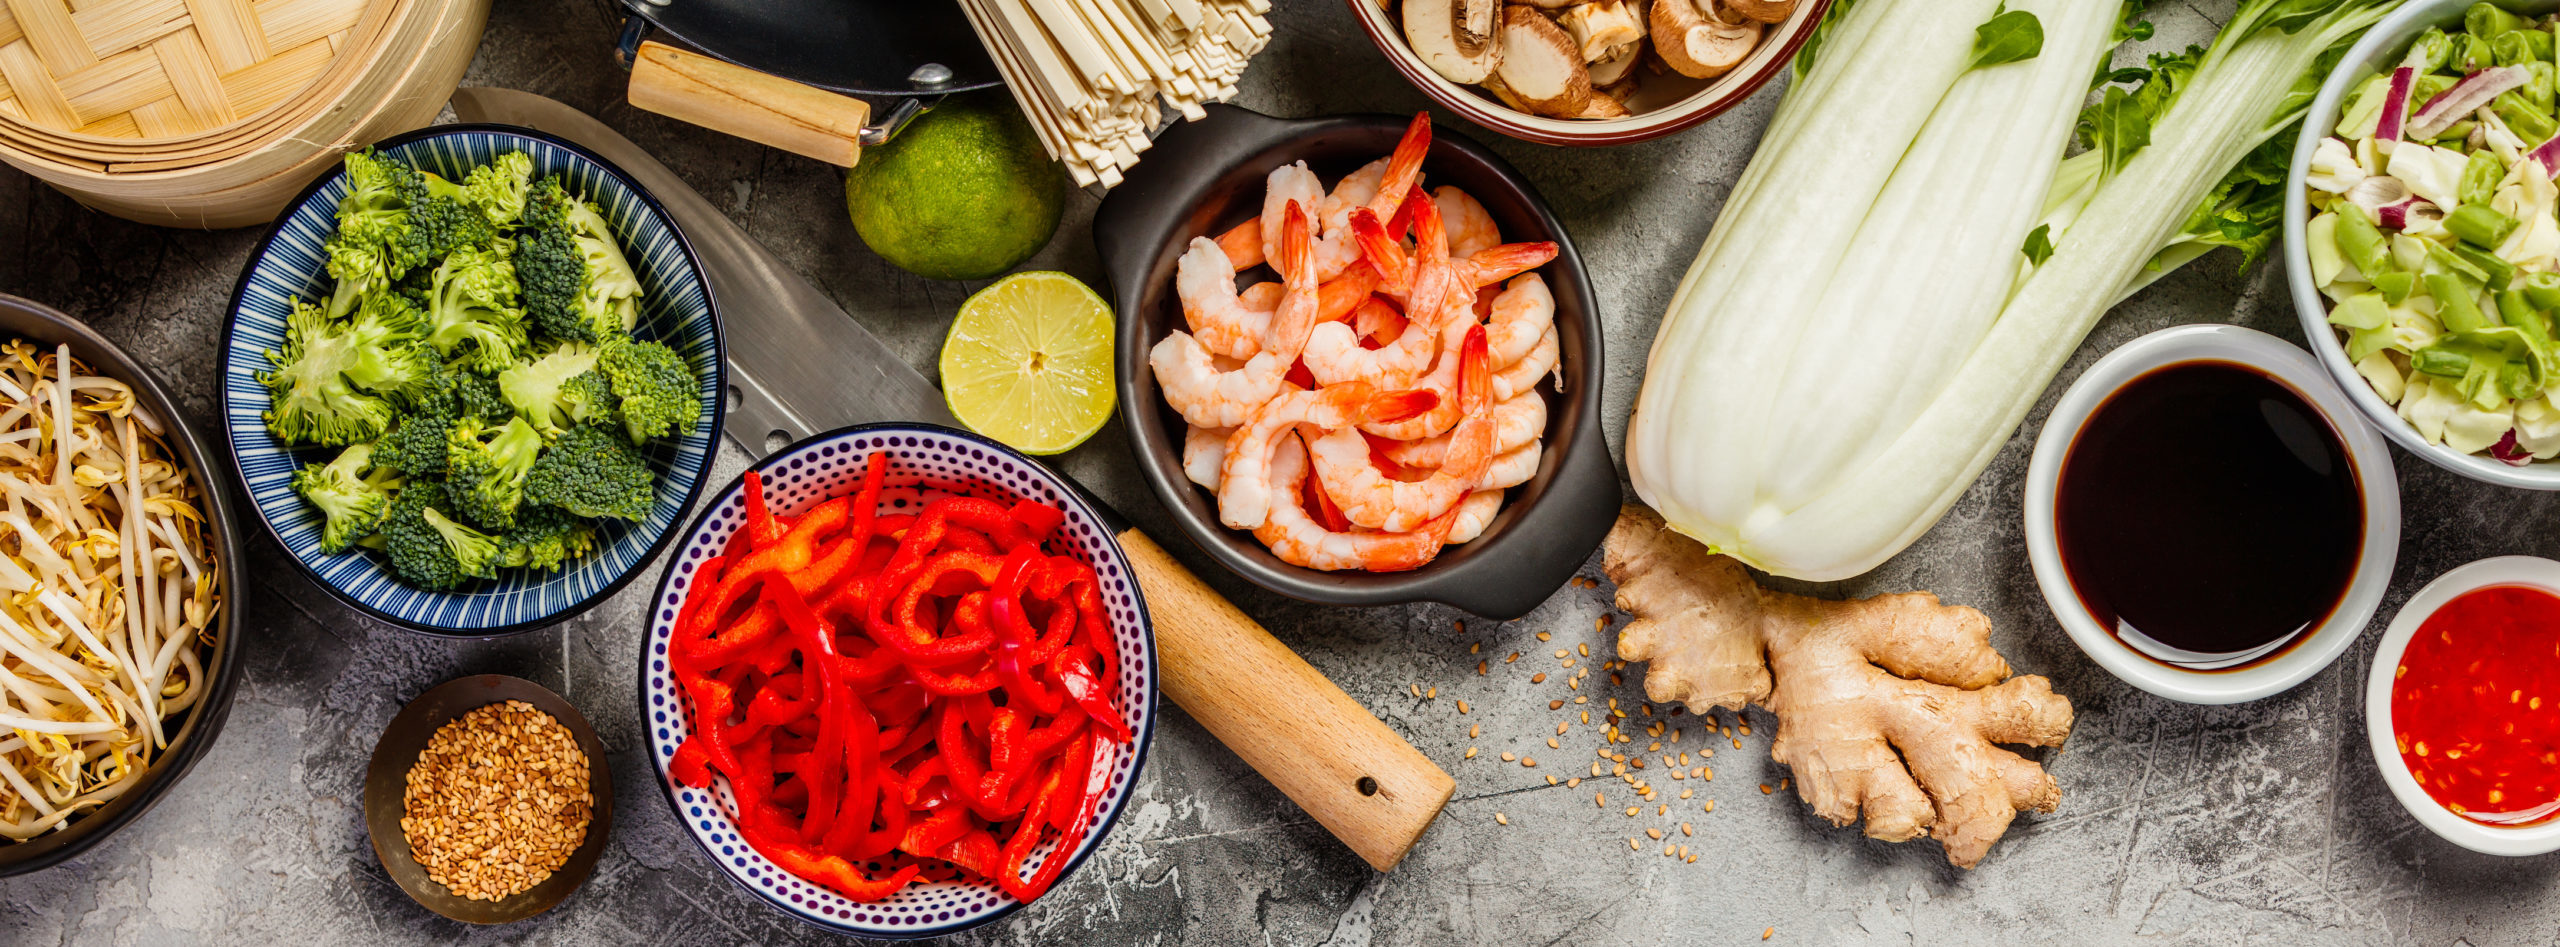 Asian cuisine ingredients on grey stone background, top view. Vegetables, spices, shrimp, noodles, sauces for cooking vietnamese, thai or chinese food. Clean eating food concept